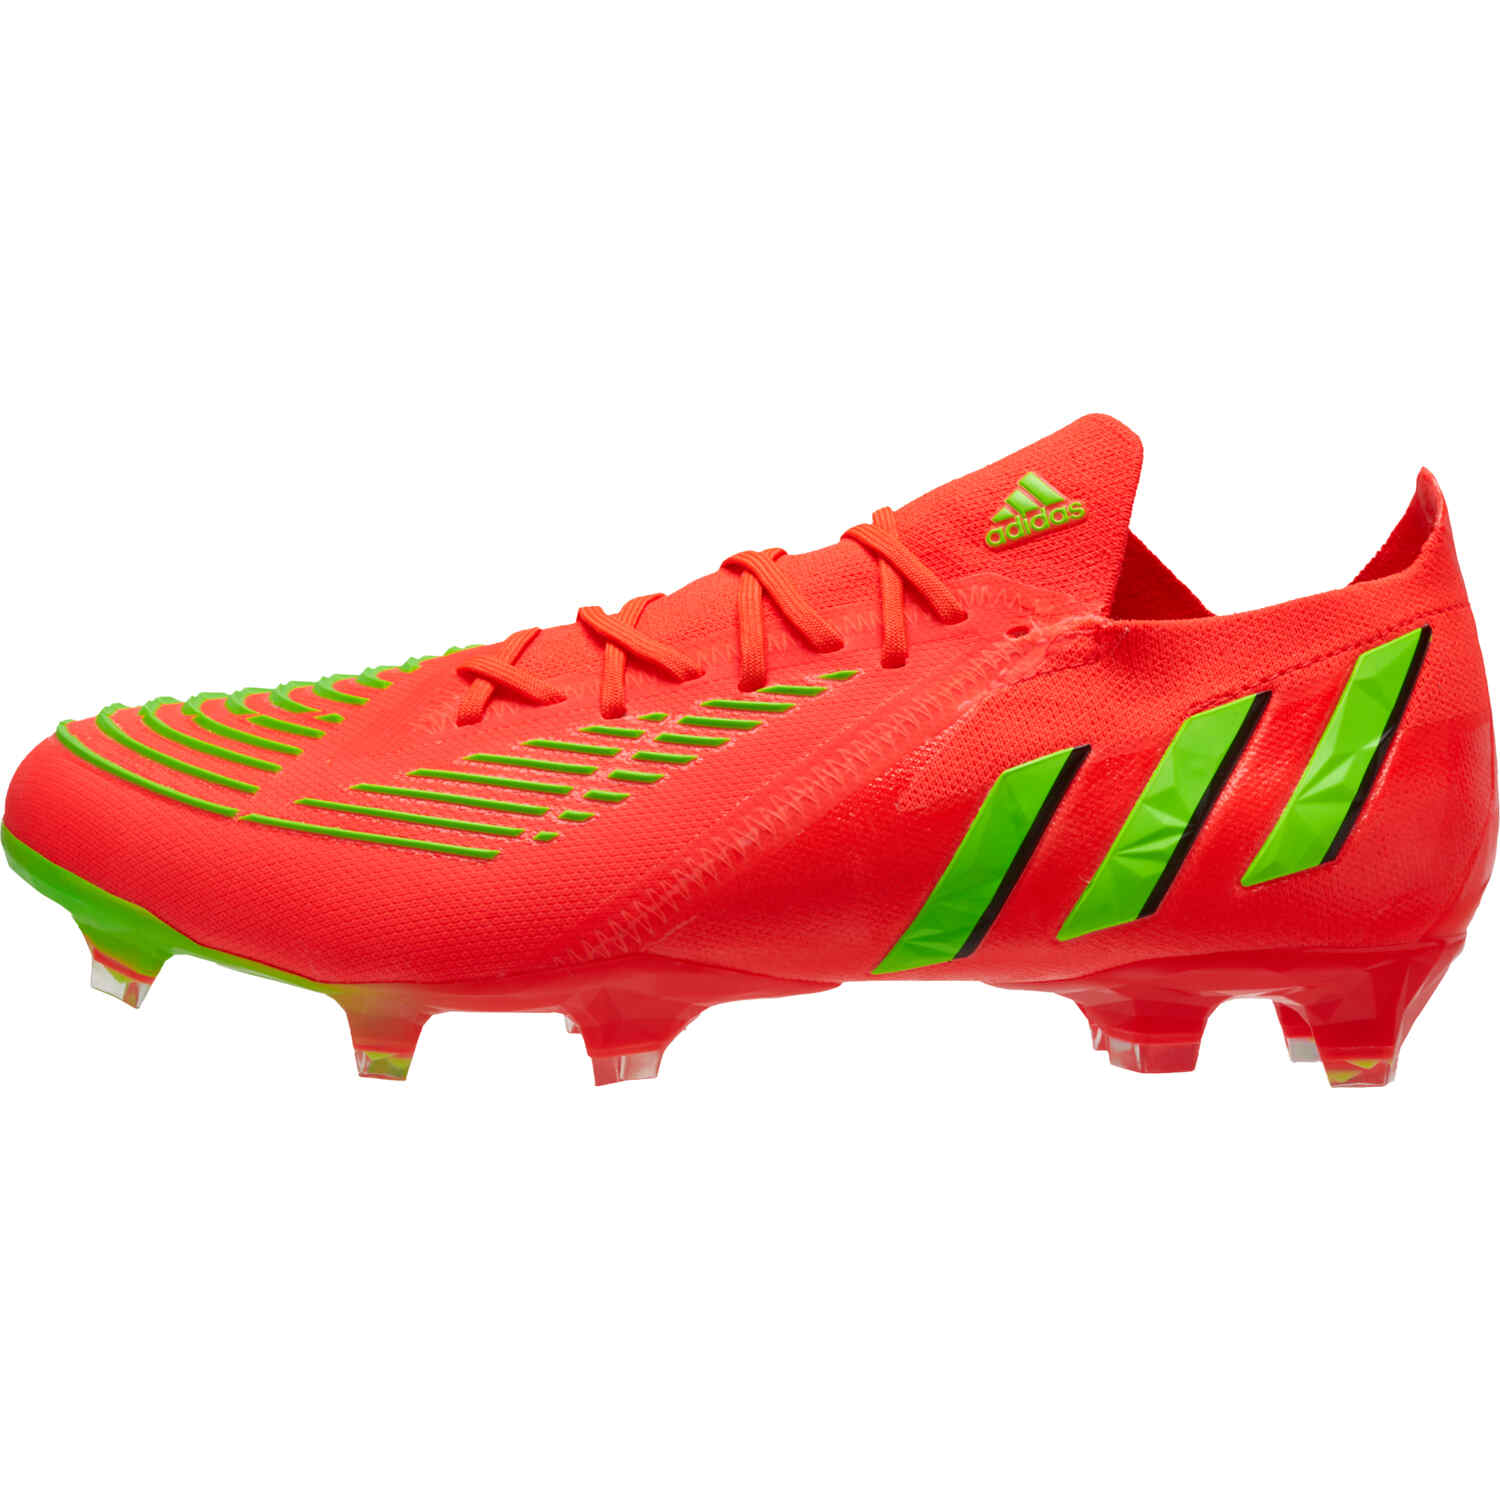 adidas Low Cut Predator Edge.1 FG Firm Ground Soccer Cleats - Game Data  Pack - Soccer Master